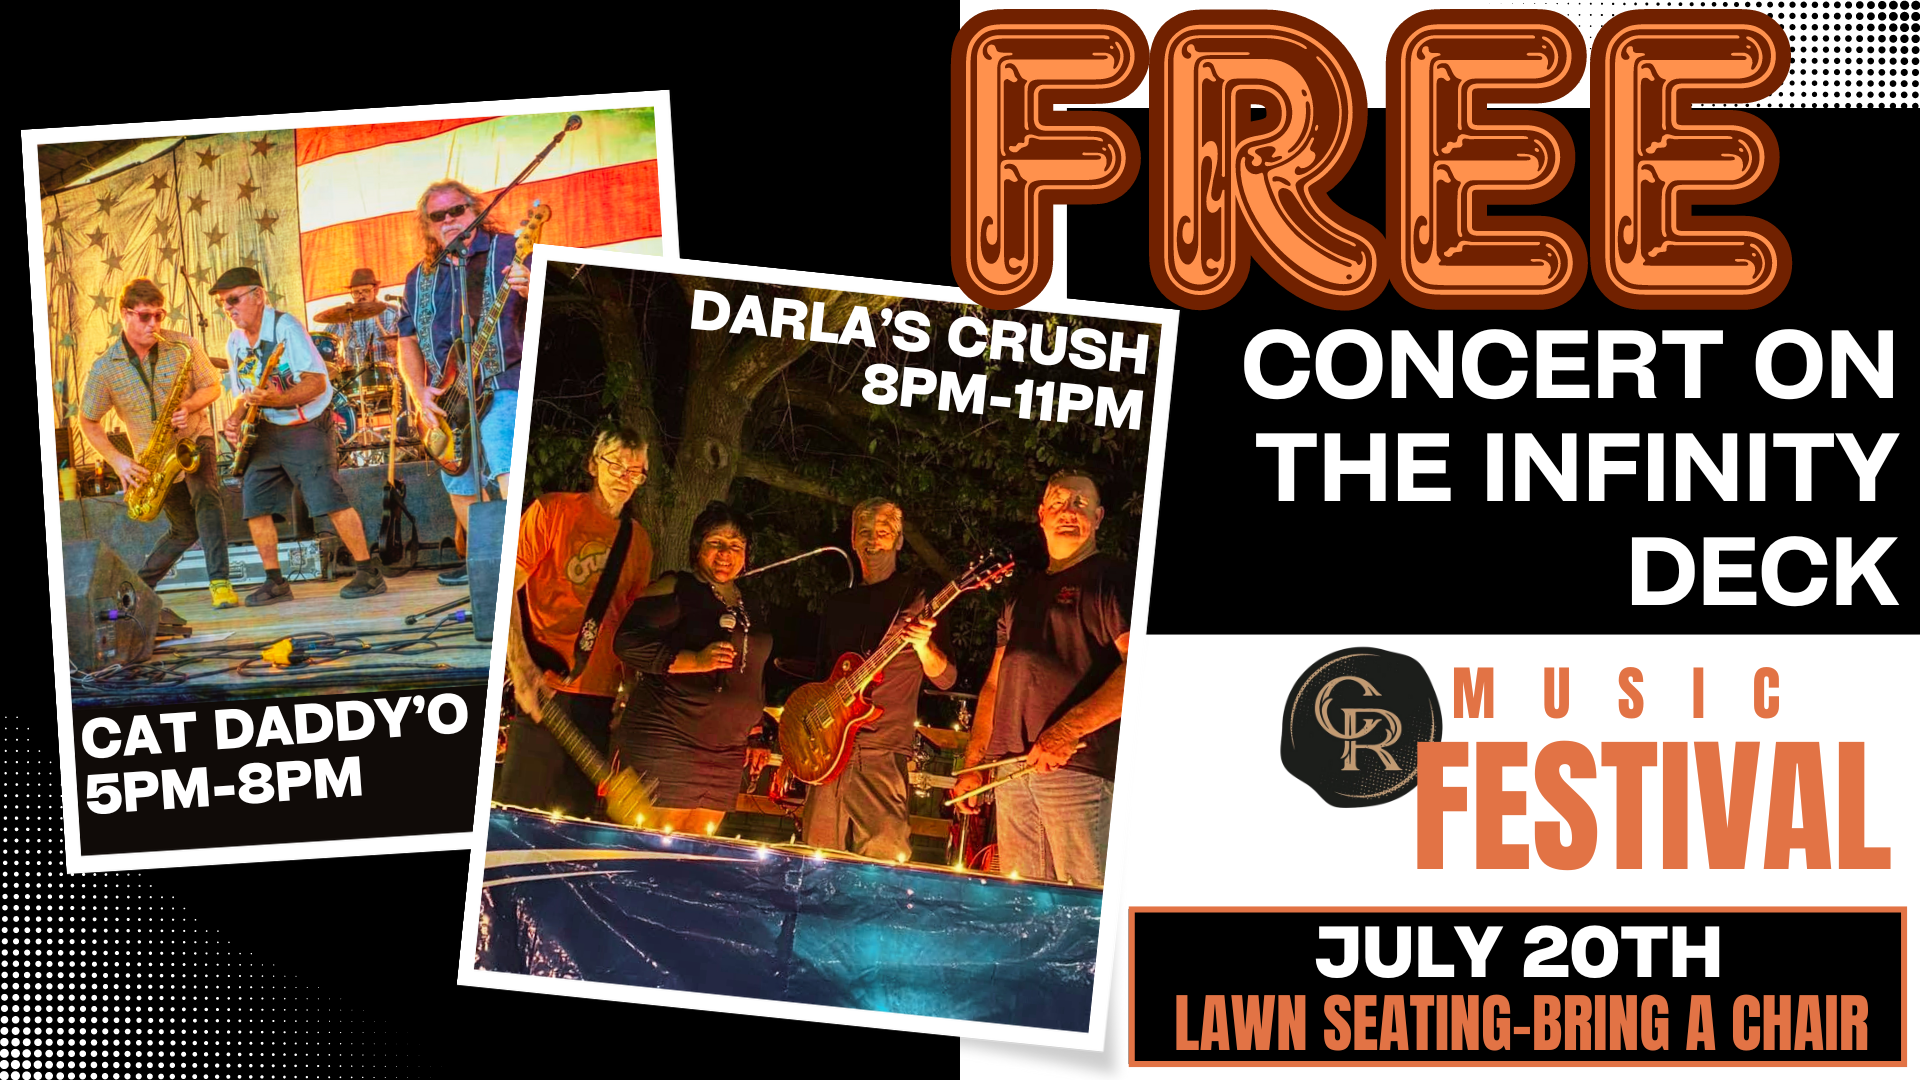 FREE Concert On The Infinity Deck! Cat Daddy’O & Darla’s Crush